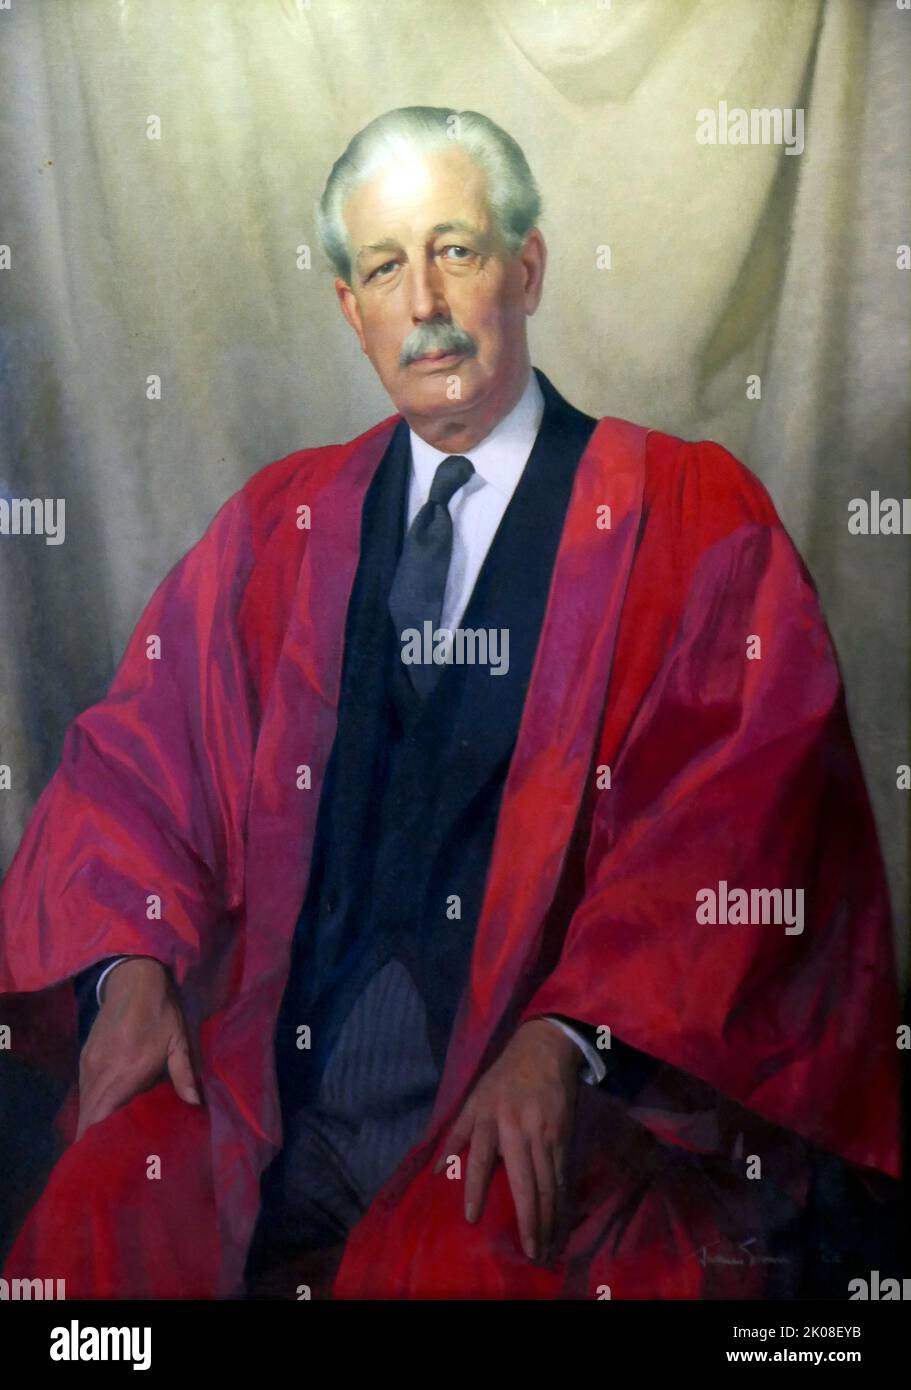 Maurice Harold Macmillan, 1st Earl of Stockton, OM, PC, FRS (10 February 1894 - 29 December 1986) was a British Conservative statesman and politician who was Prime Minister of the United Kingdom from 1957 to 1963. Caricatured as 'Supermac', he was known for his pragmatism, wit and unflappability. Oil painting of Macmillan as Chancellor in 1960 at the University of Oxford Stock Photo